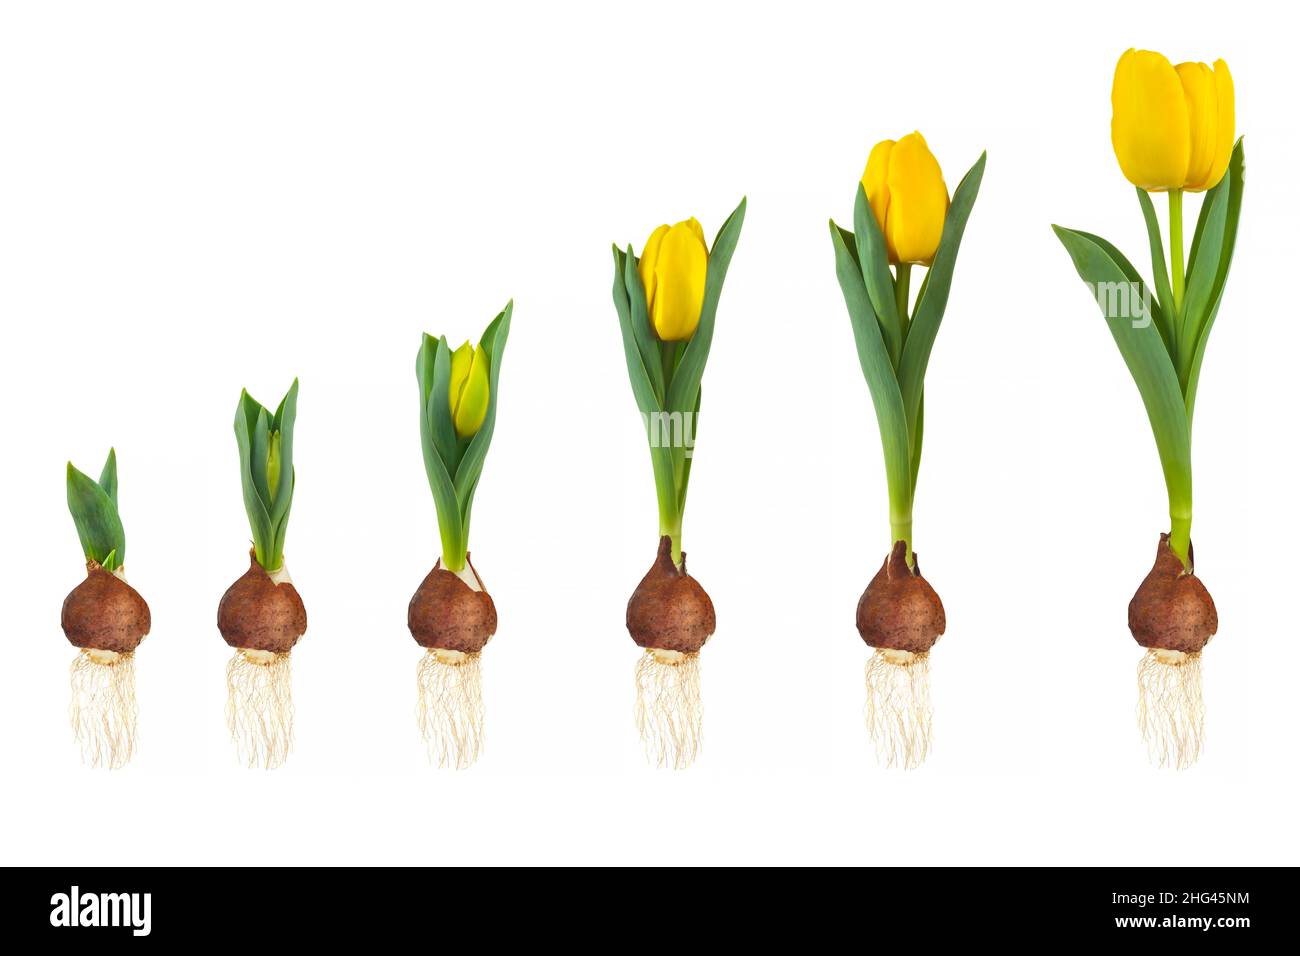 Growth stages of a yellow tulip from flower bulb to blooming flower isolated on a white background Stock Photo